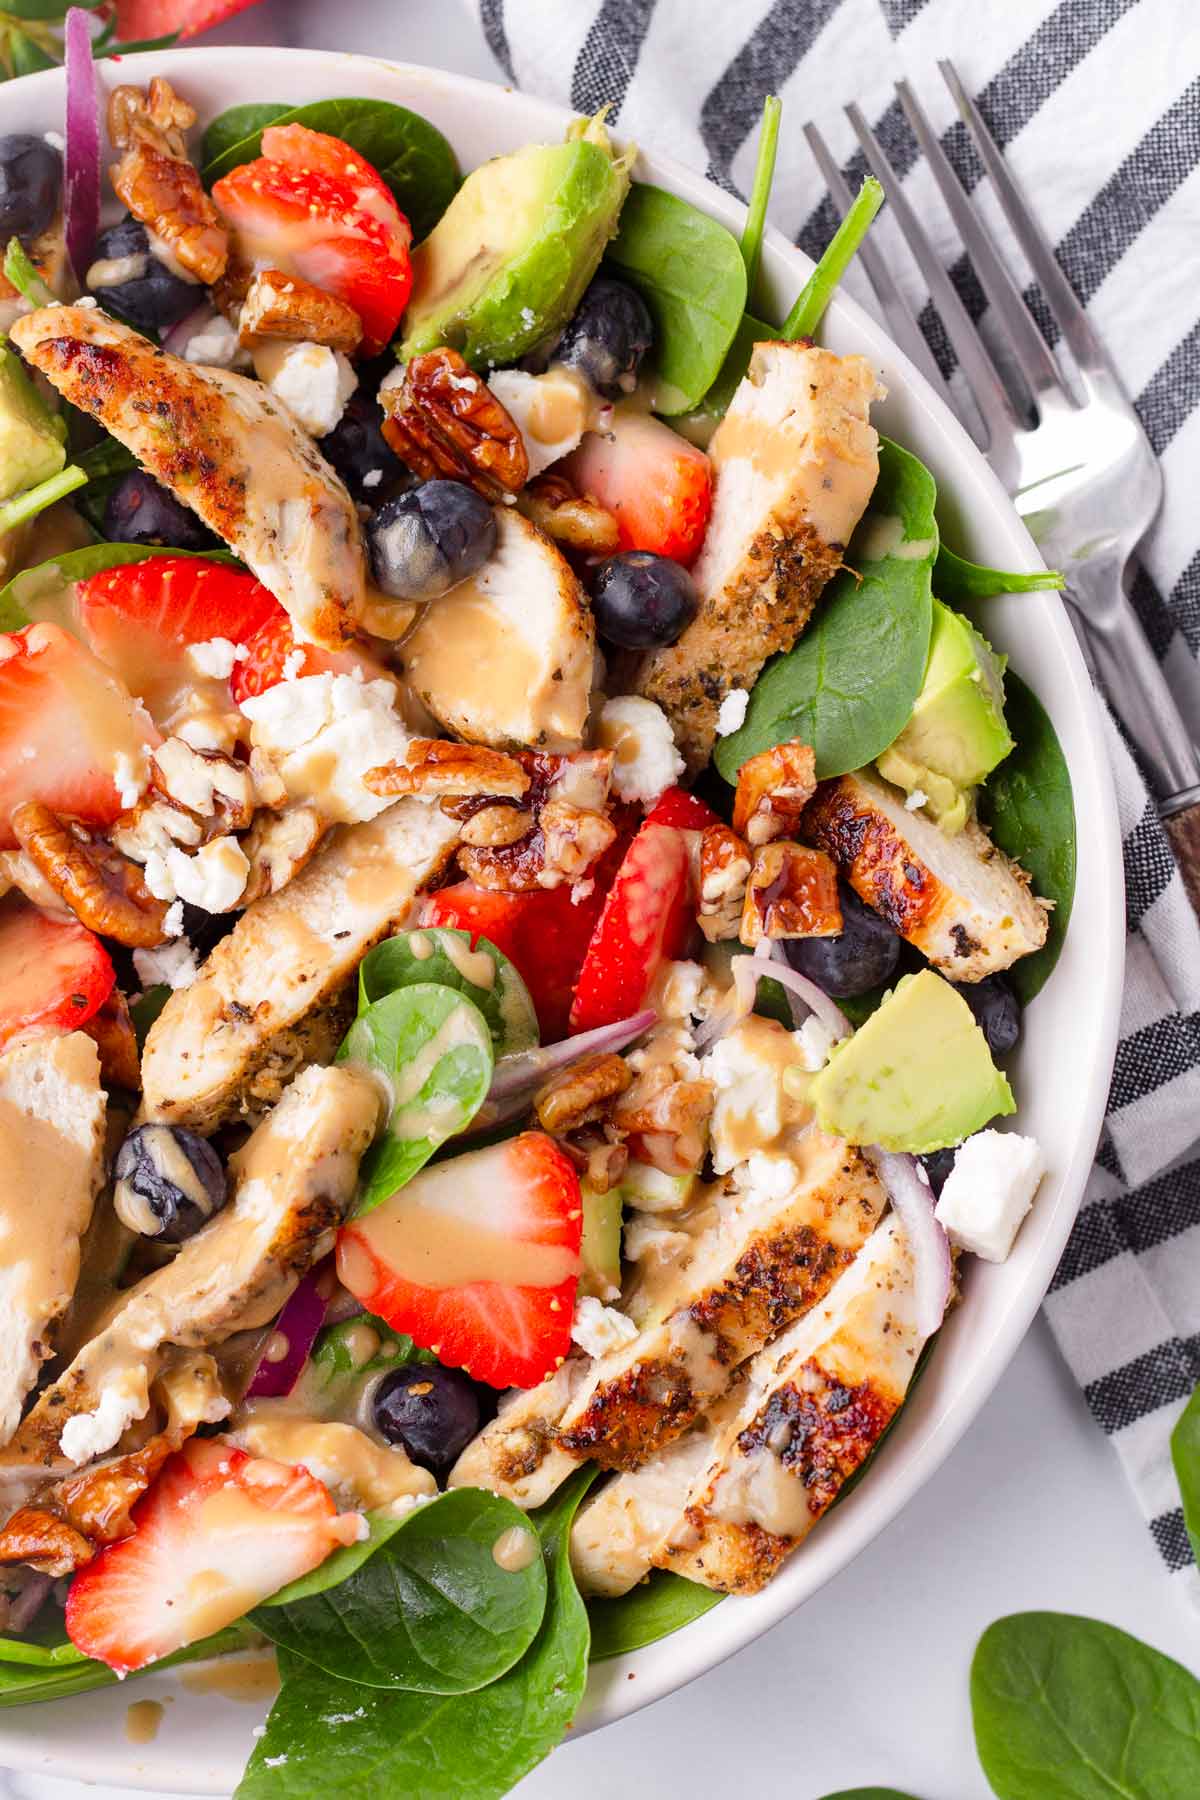 assembled strawberry and spinach salad with chicken